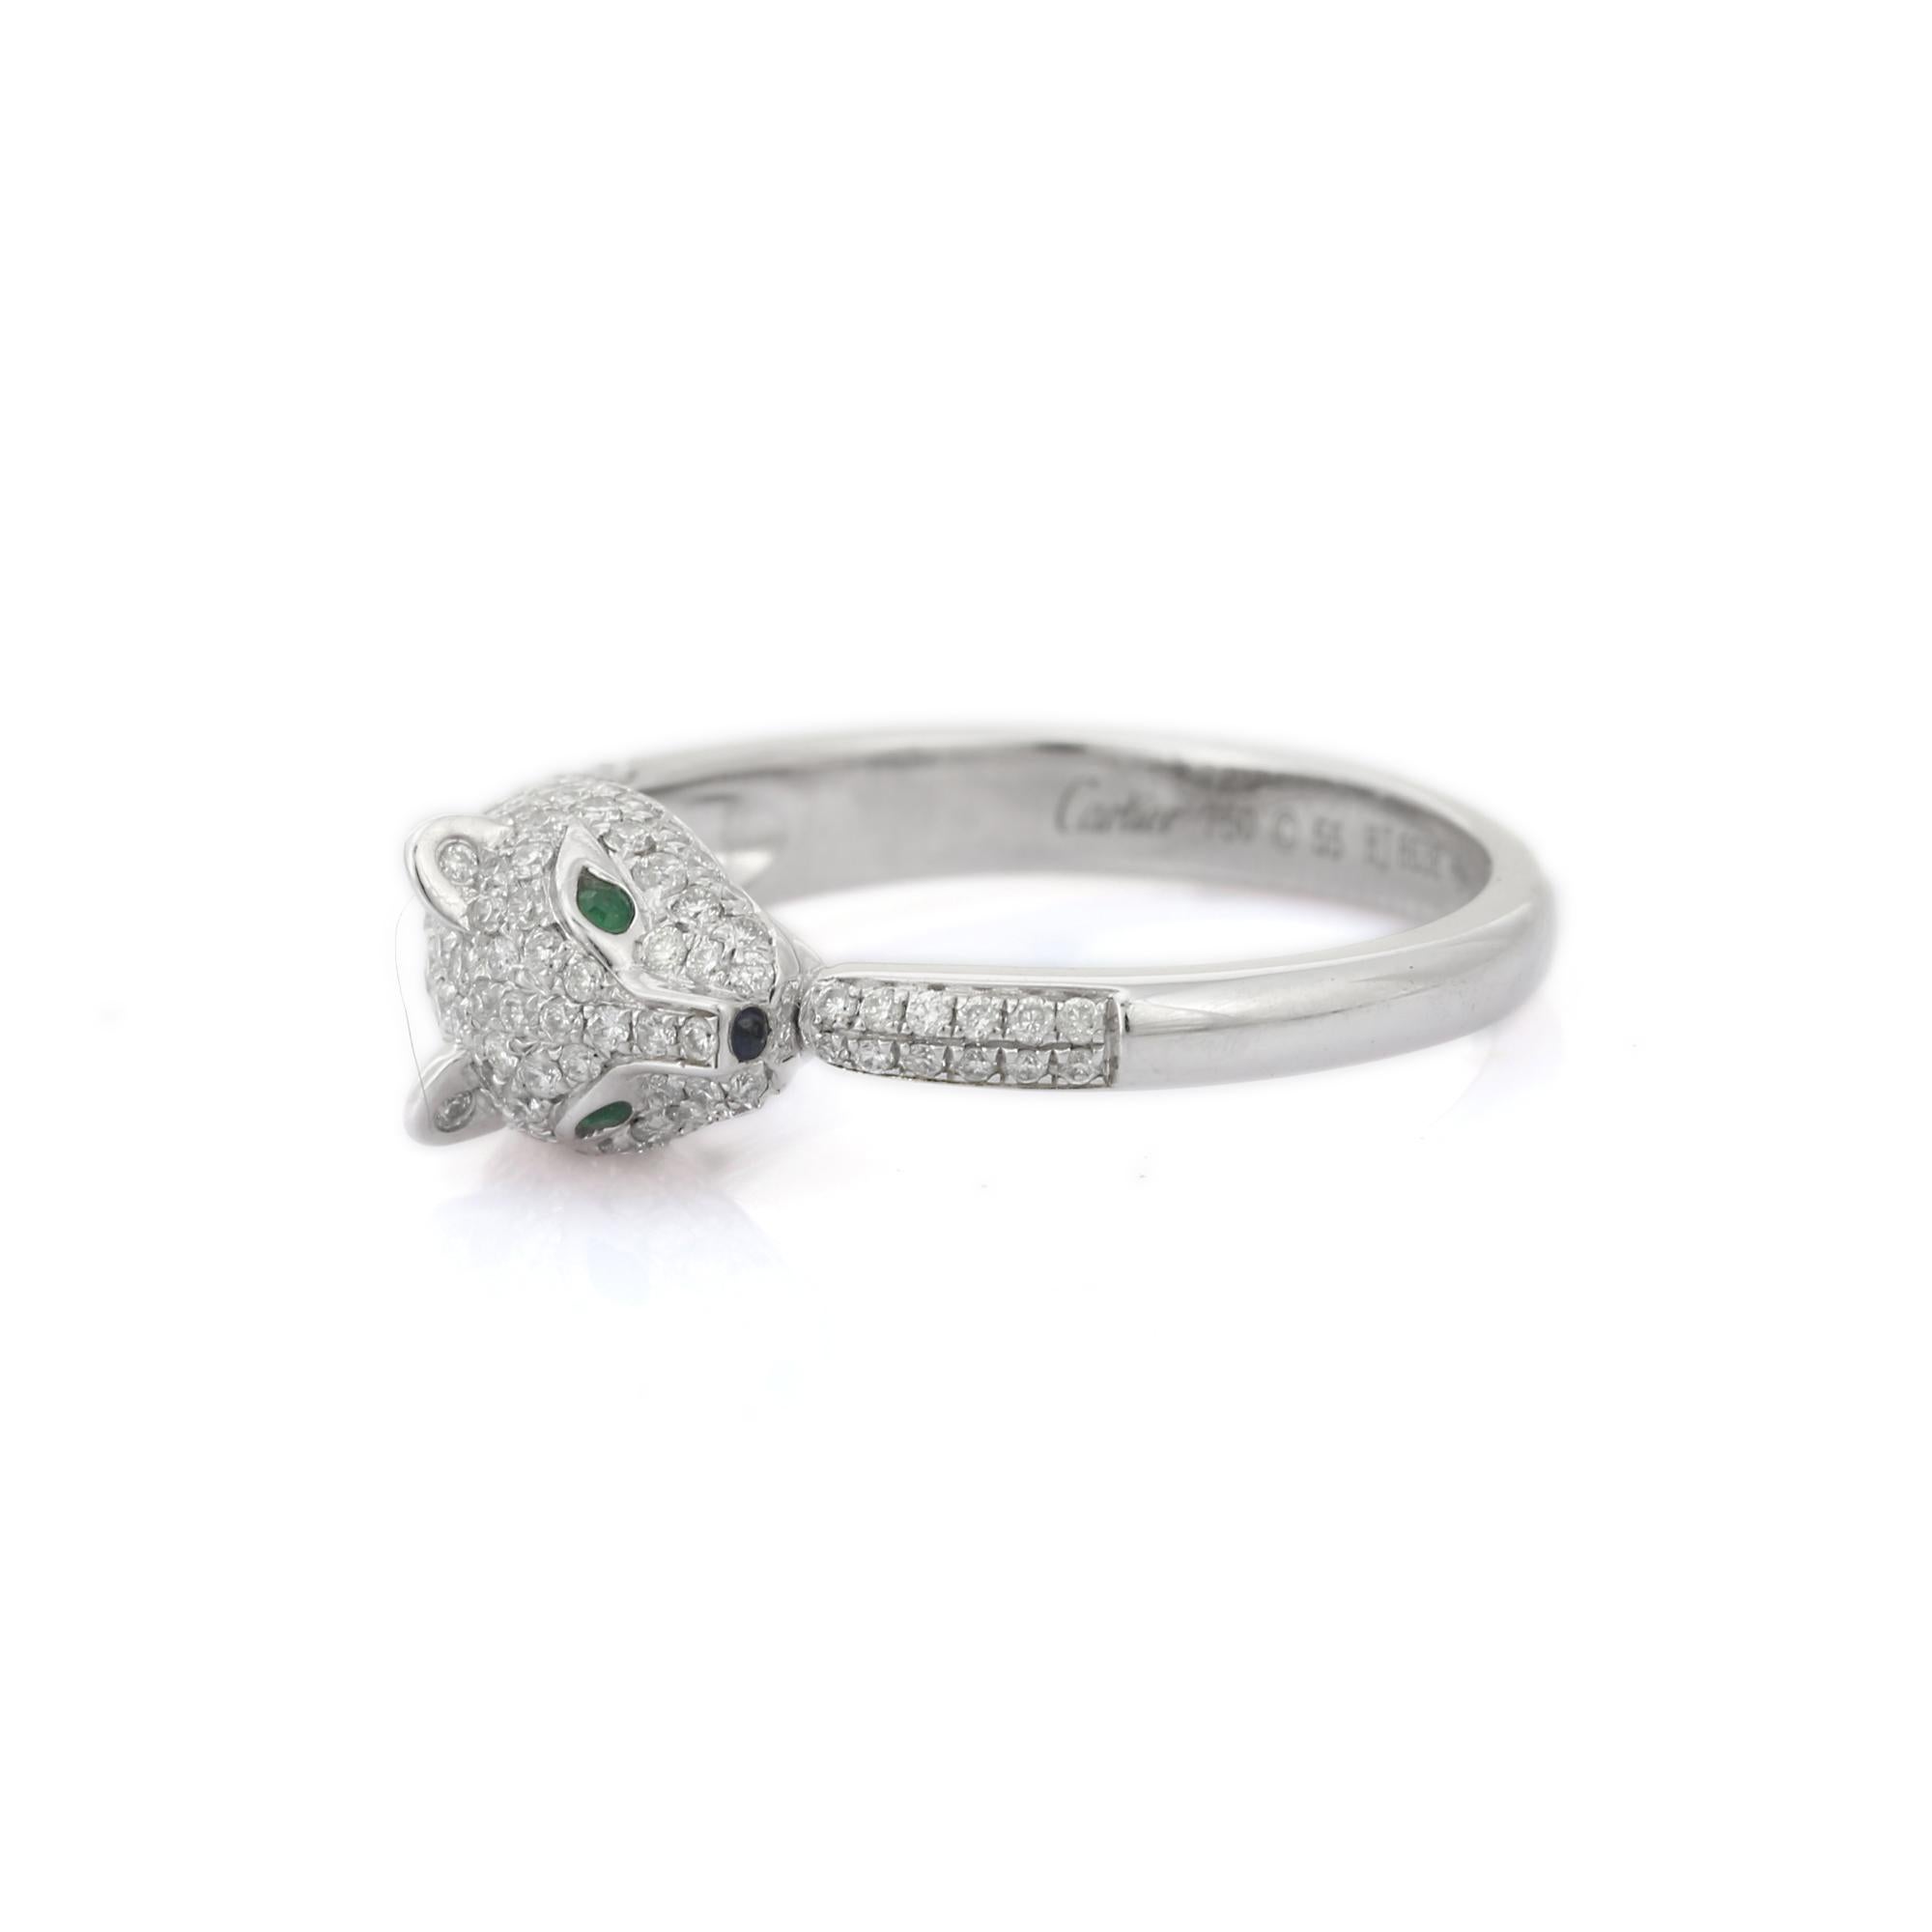 For Sale:  18K White Gold Panther Animal Cocktail Ring with Emerald, Sapphire and Diamonds 10